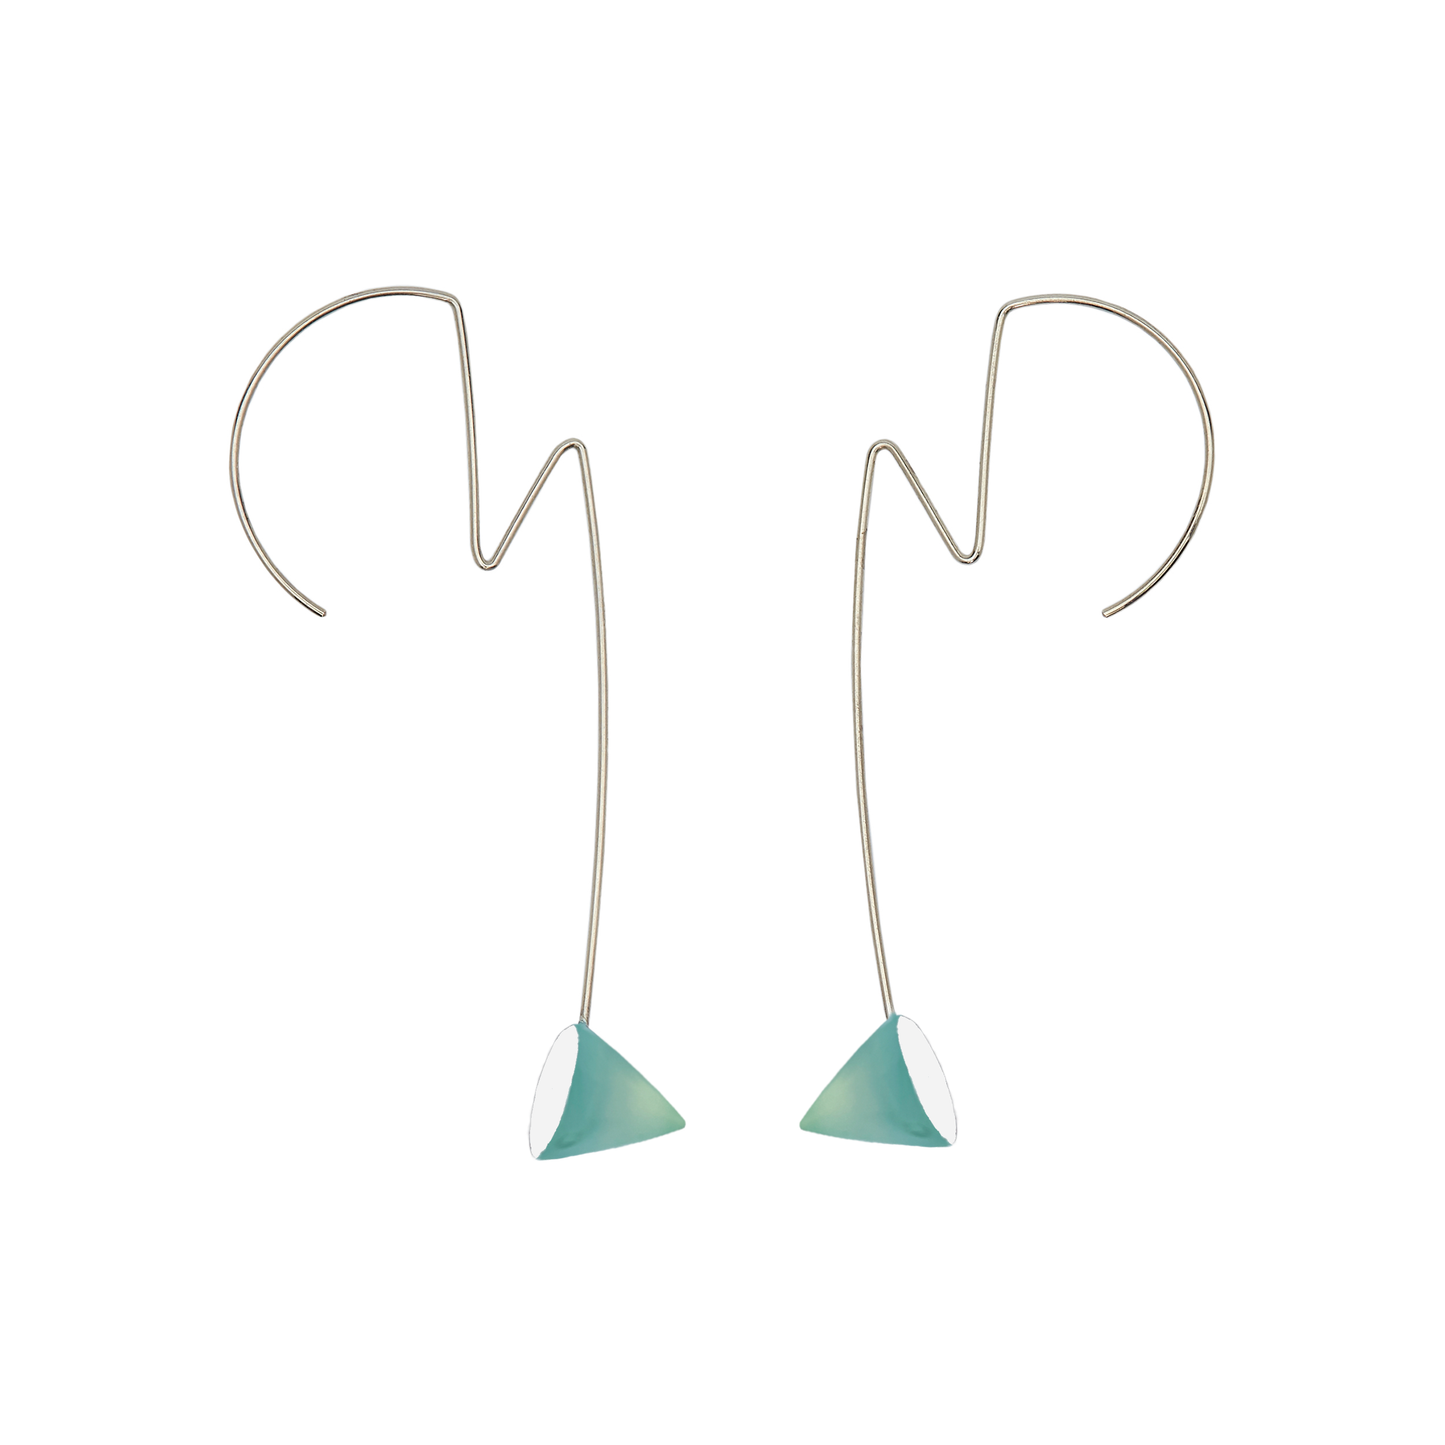 Ziggy Stardust inspired Earrings with Cone Gems